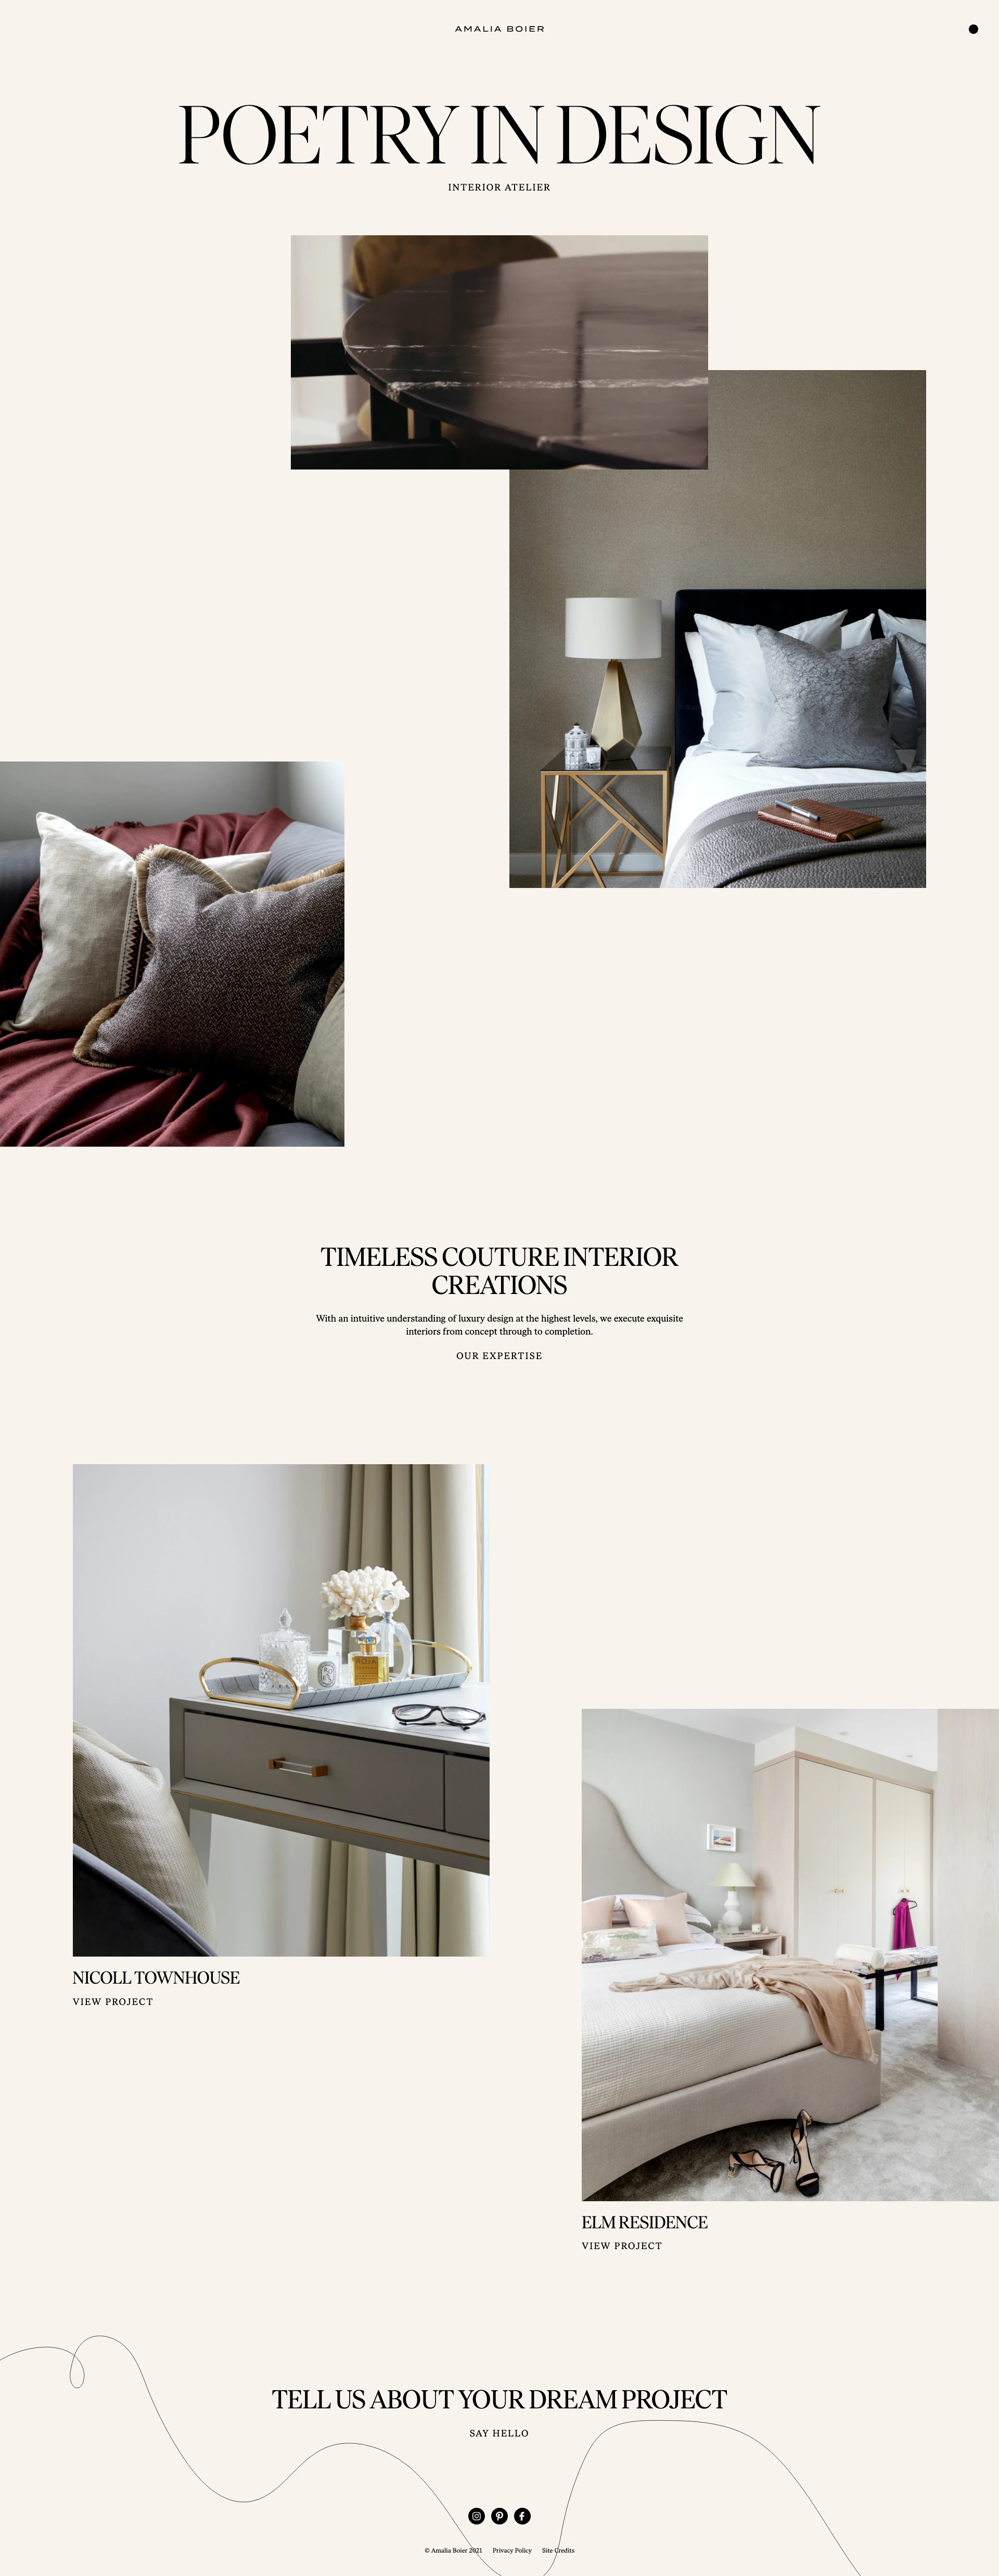 Amalia Boier Landing Page Example: A London-based interior designer with an intuitive understanding of luxury design at the highest levels, creating exquisite, couture interiors.